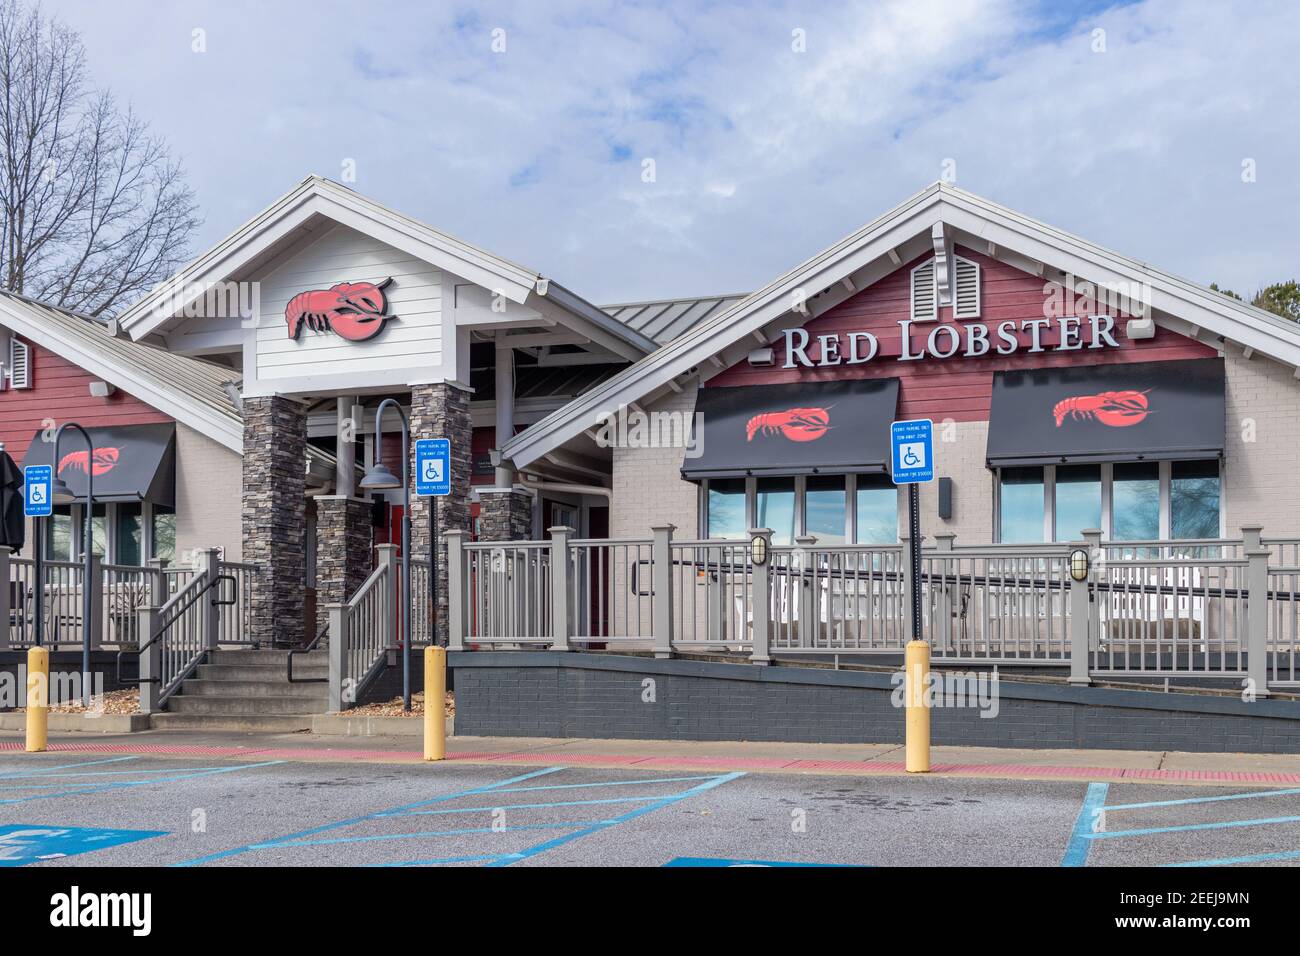 Buford, USA - Jan 17th 2021: Exterior view of the Red Lobster restaurant in Buford, GA Stock Photo